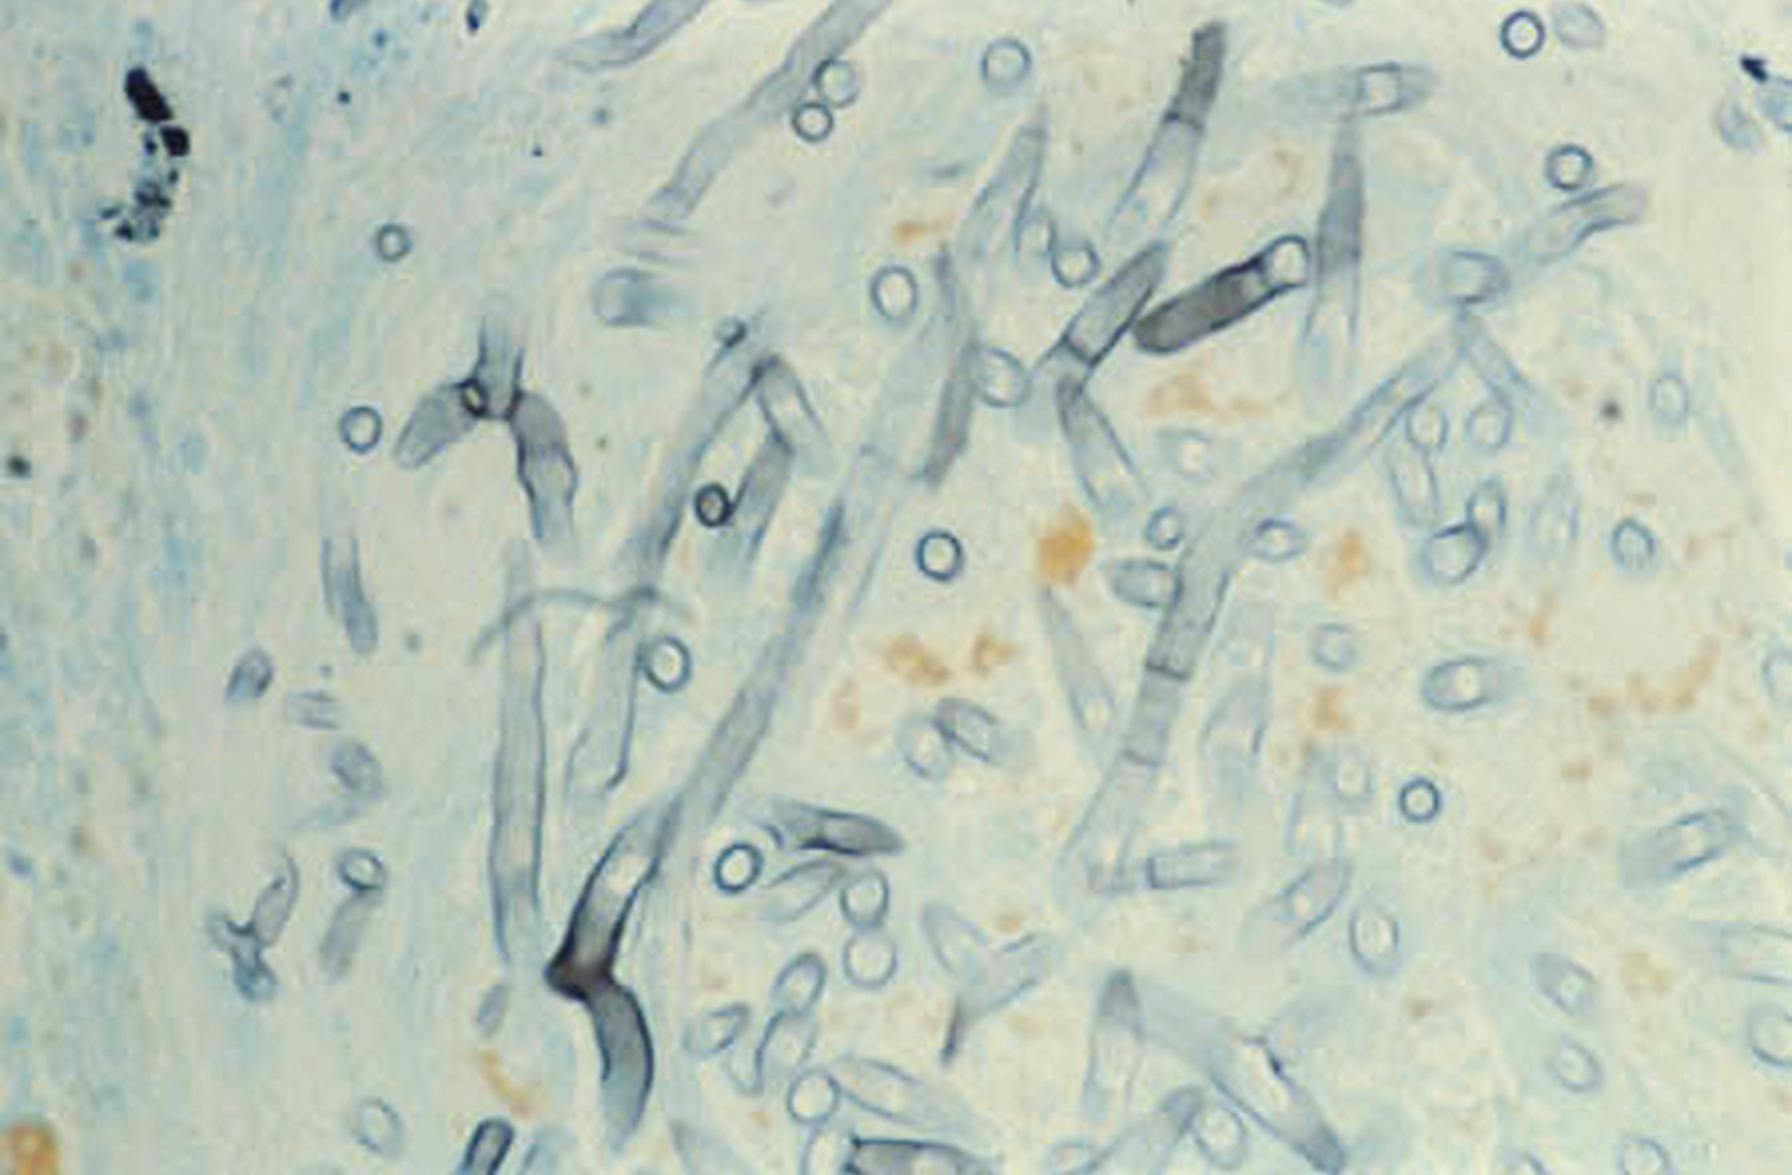 Fig. 60.4, Characteristic narrow branching, septate hyphae of a hyaline mold in tissue.